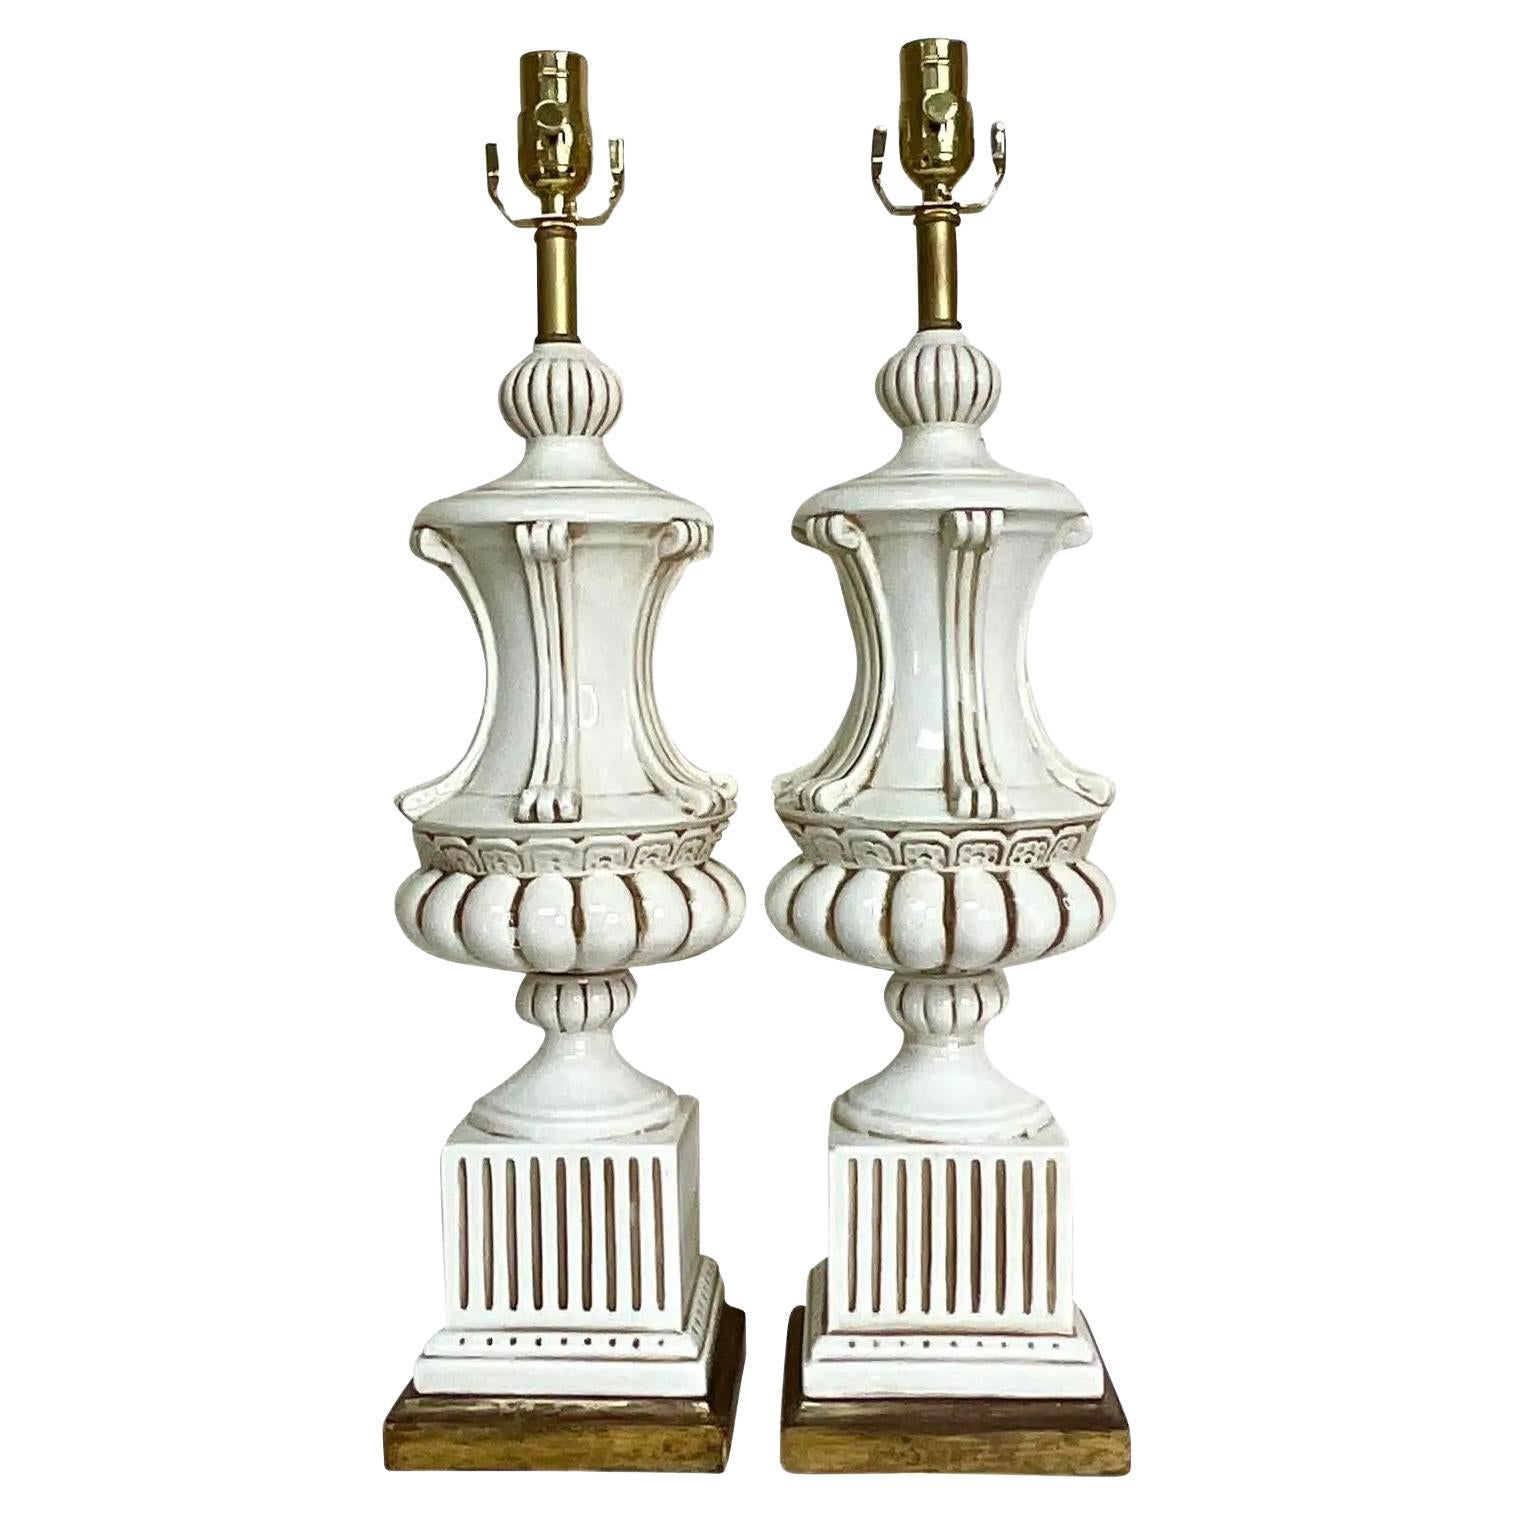 Vintage Italian Glazed Ceramic Urn Lamps - a Pair For Sale